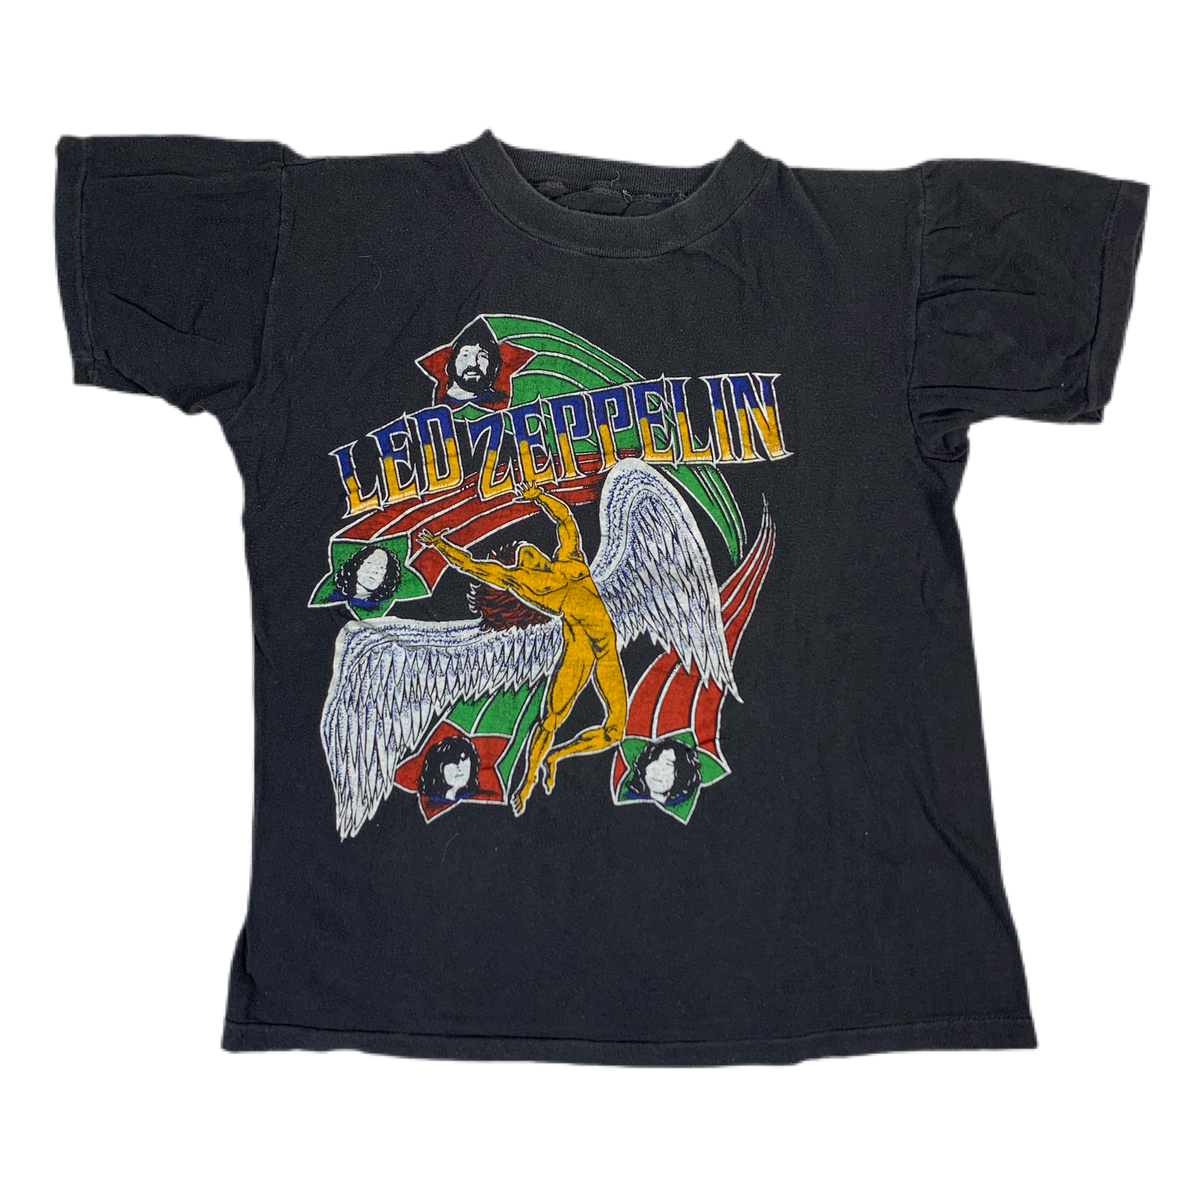 LED ZEPPELIN ヴィンテージ Tシャツ ロック バンド 菅田将暉 レア ...